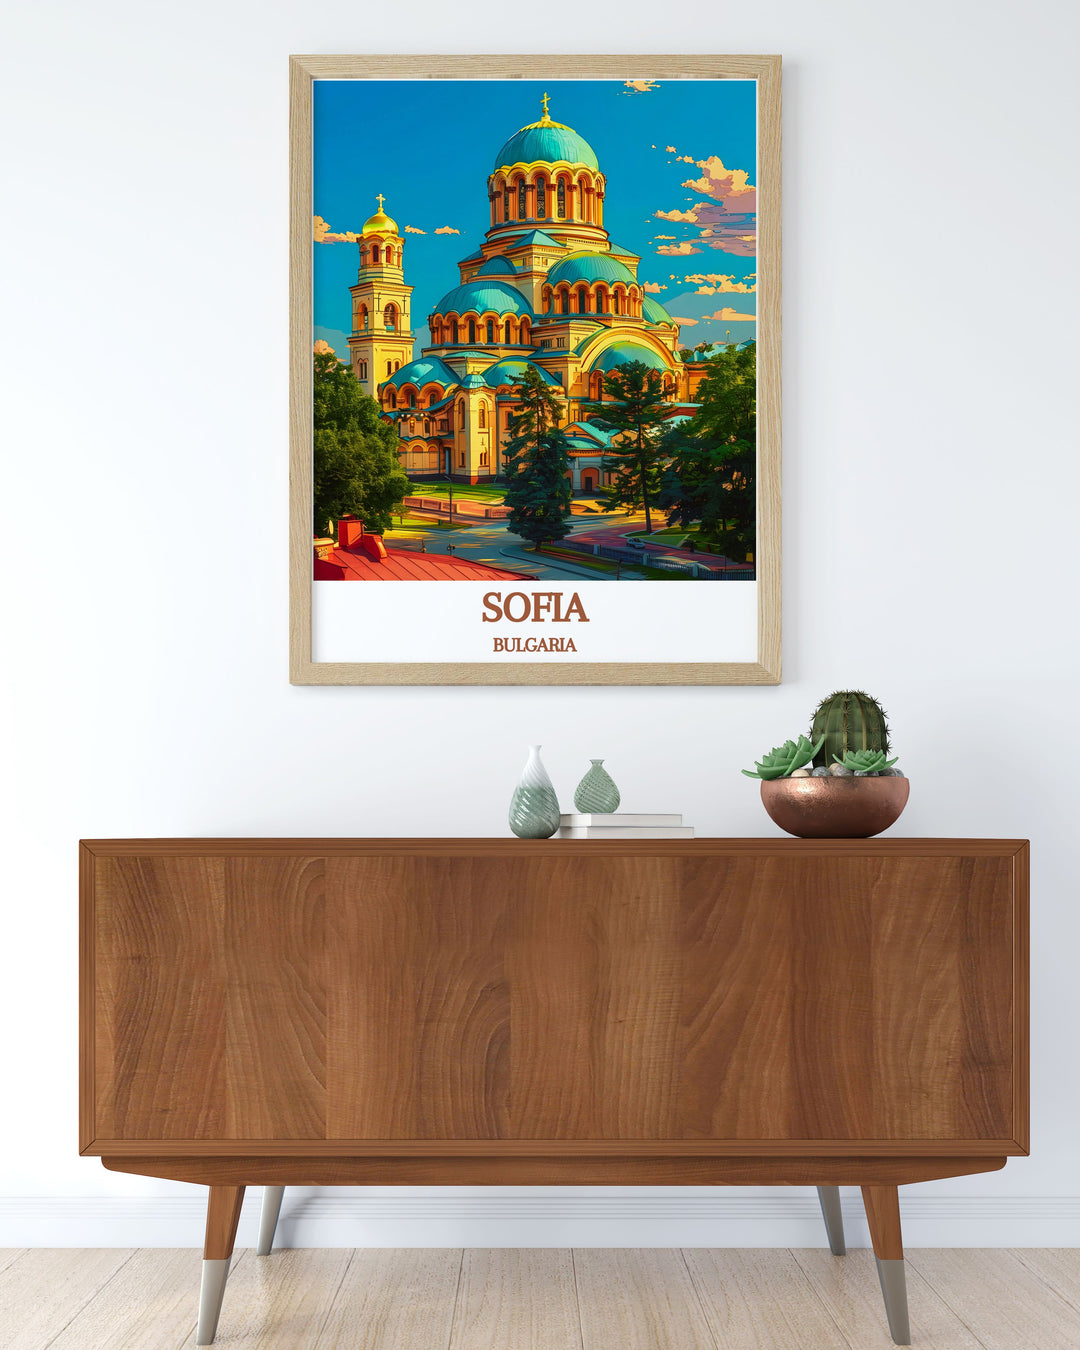 Exquisite Sofia Art Print capturing the essence of BULGARIA St. Alexander Nevsky Cathedral with exceptional clarity and vibrant colors a must have for art lovers and travelers.